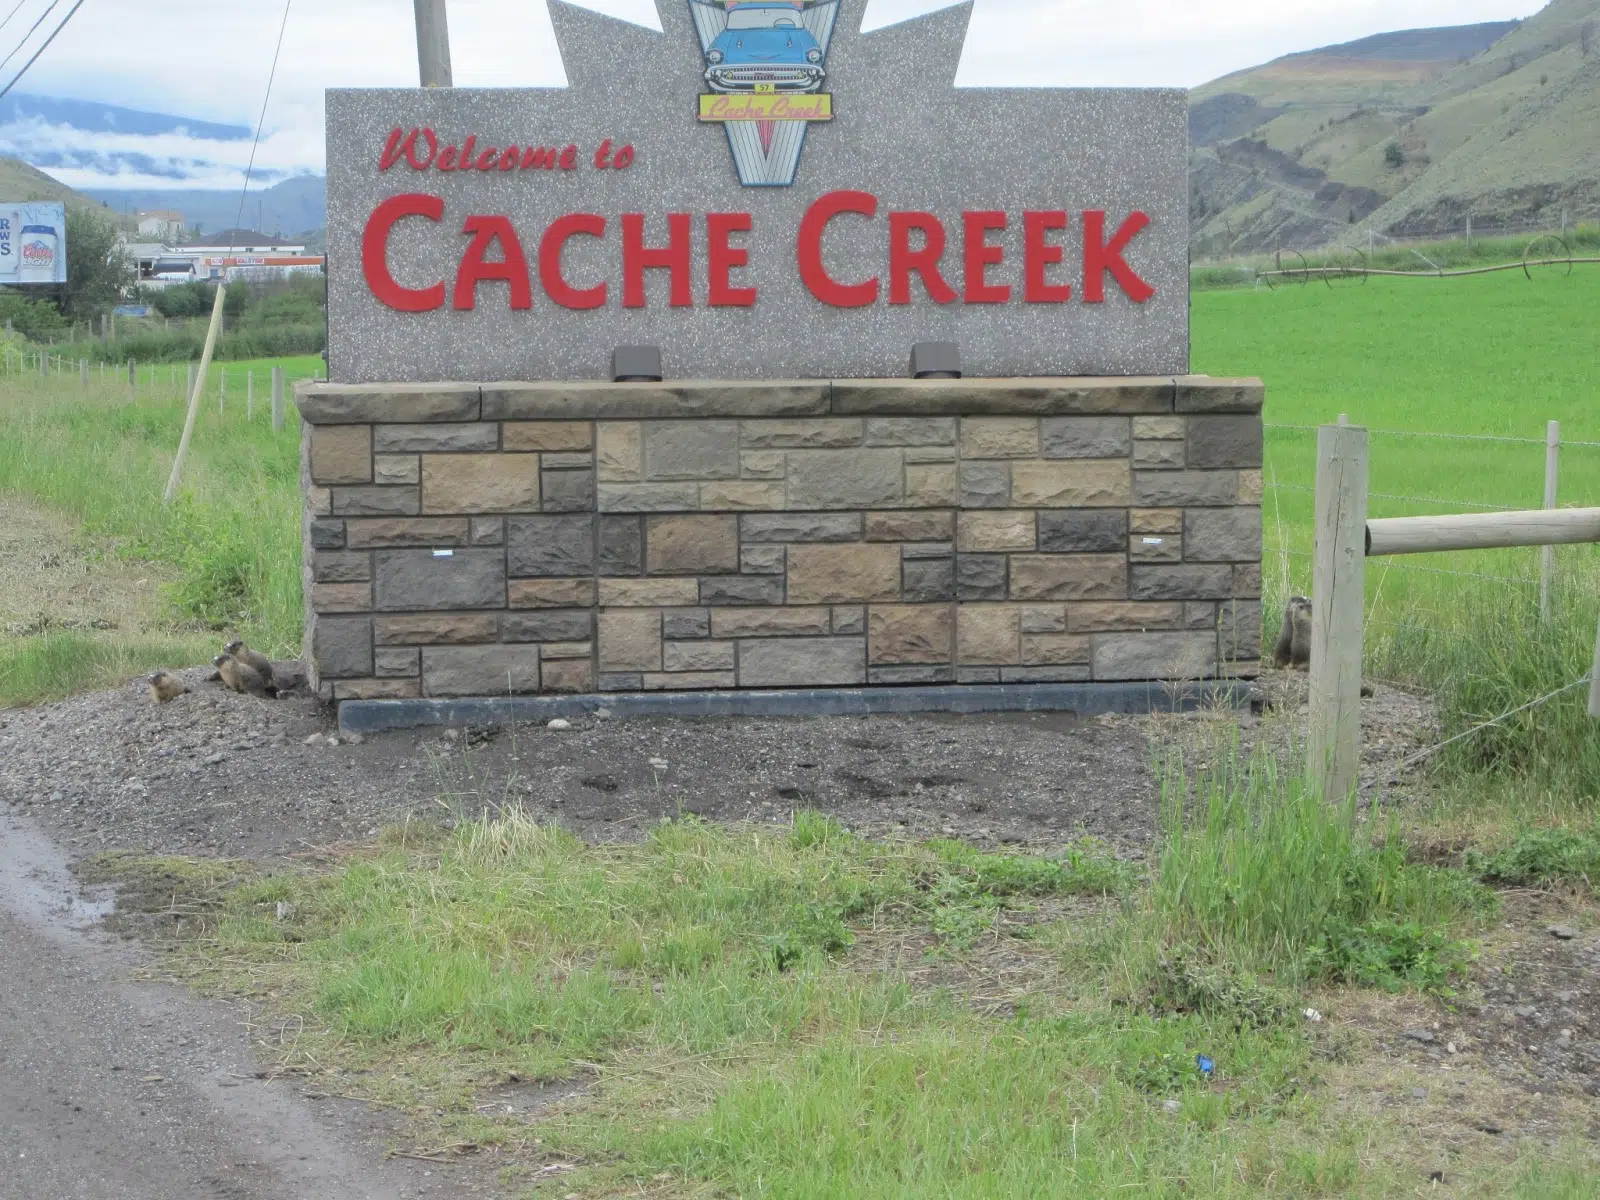 Flood fears ease in Cache Creek - for now